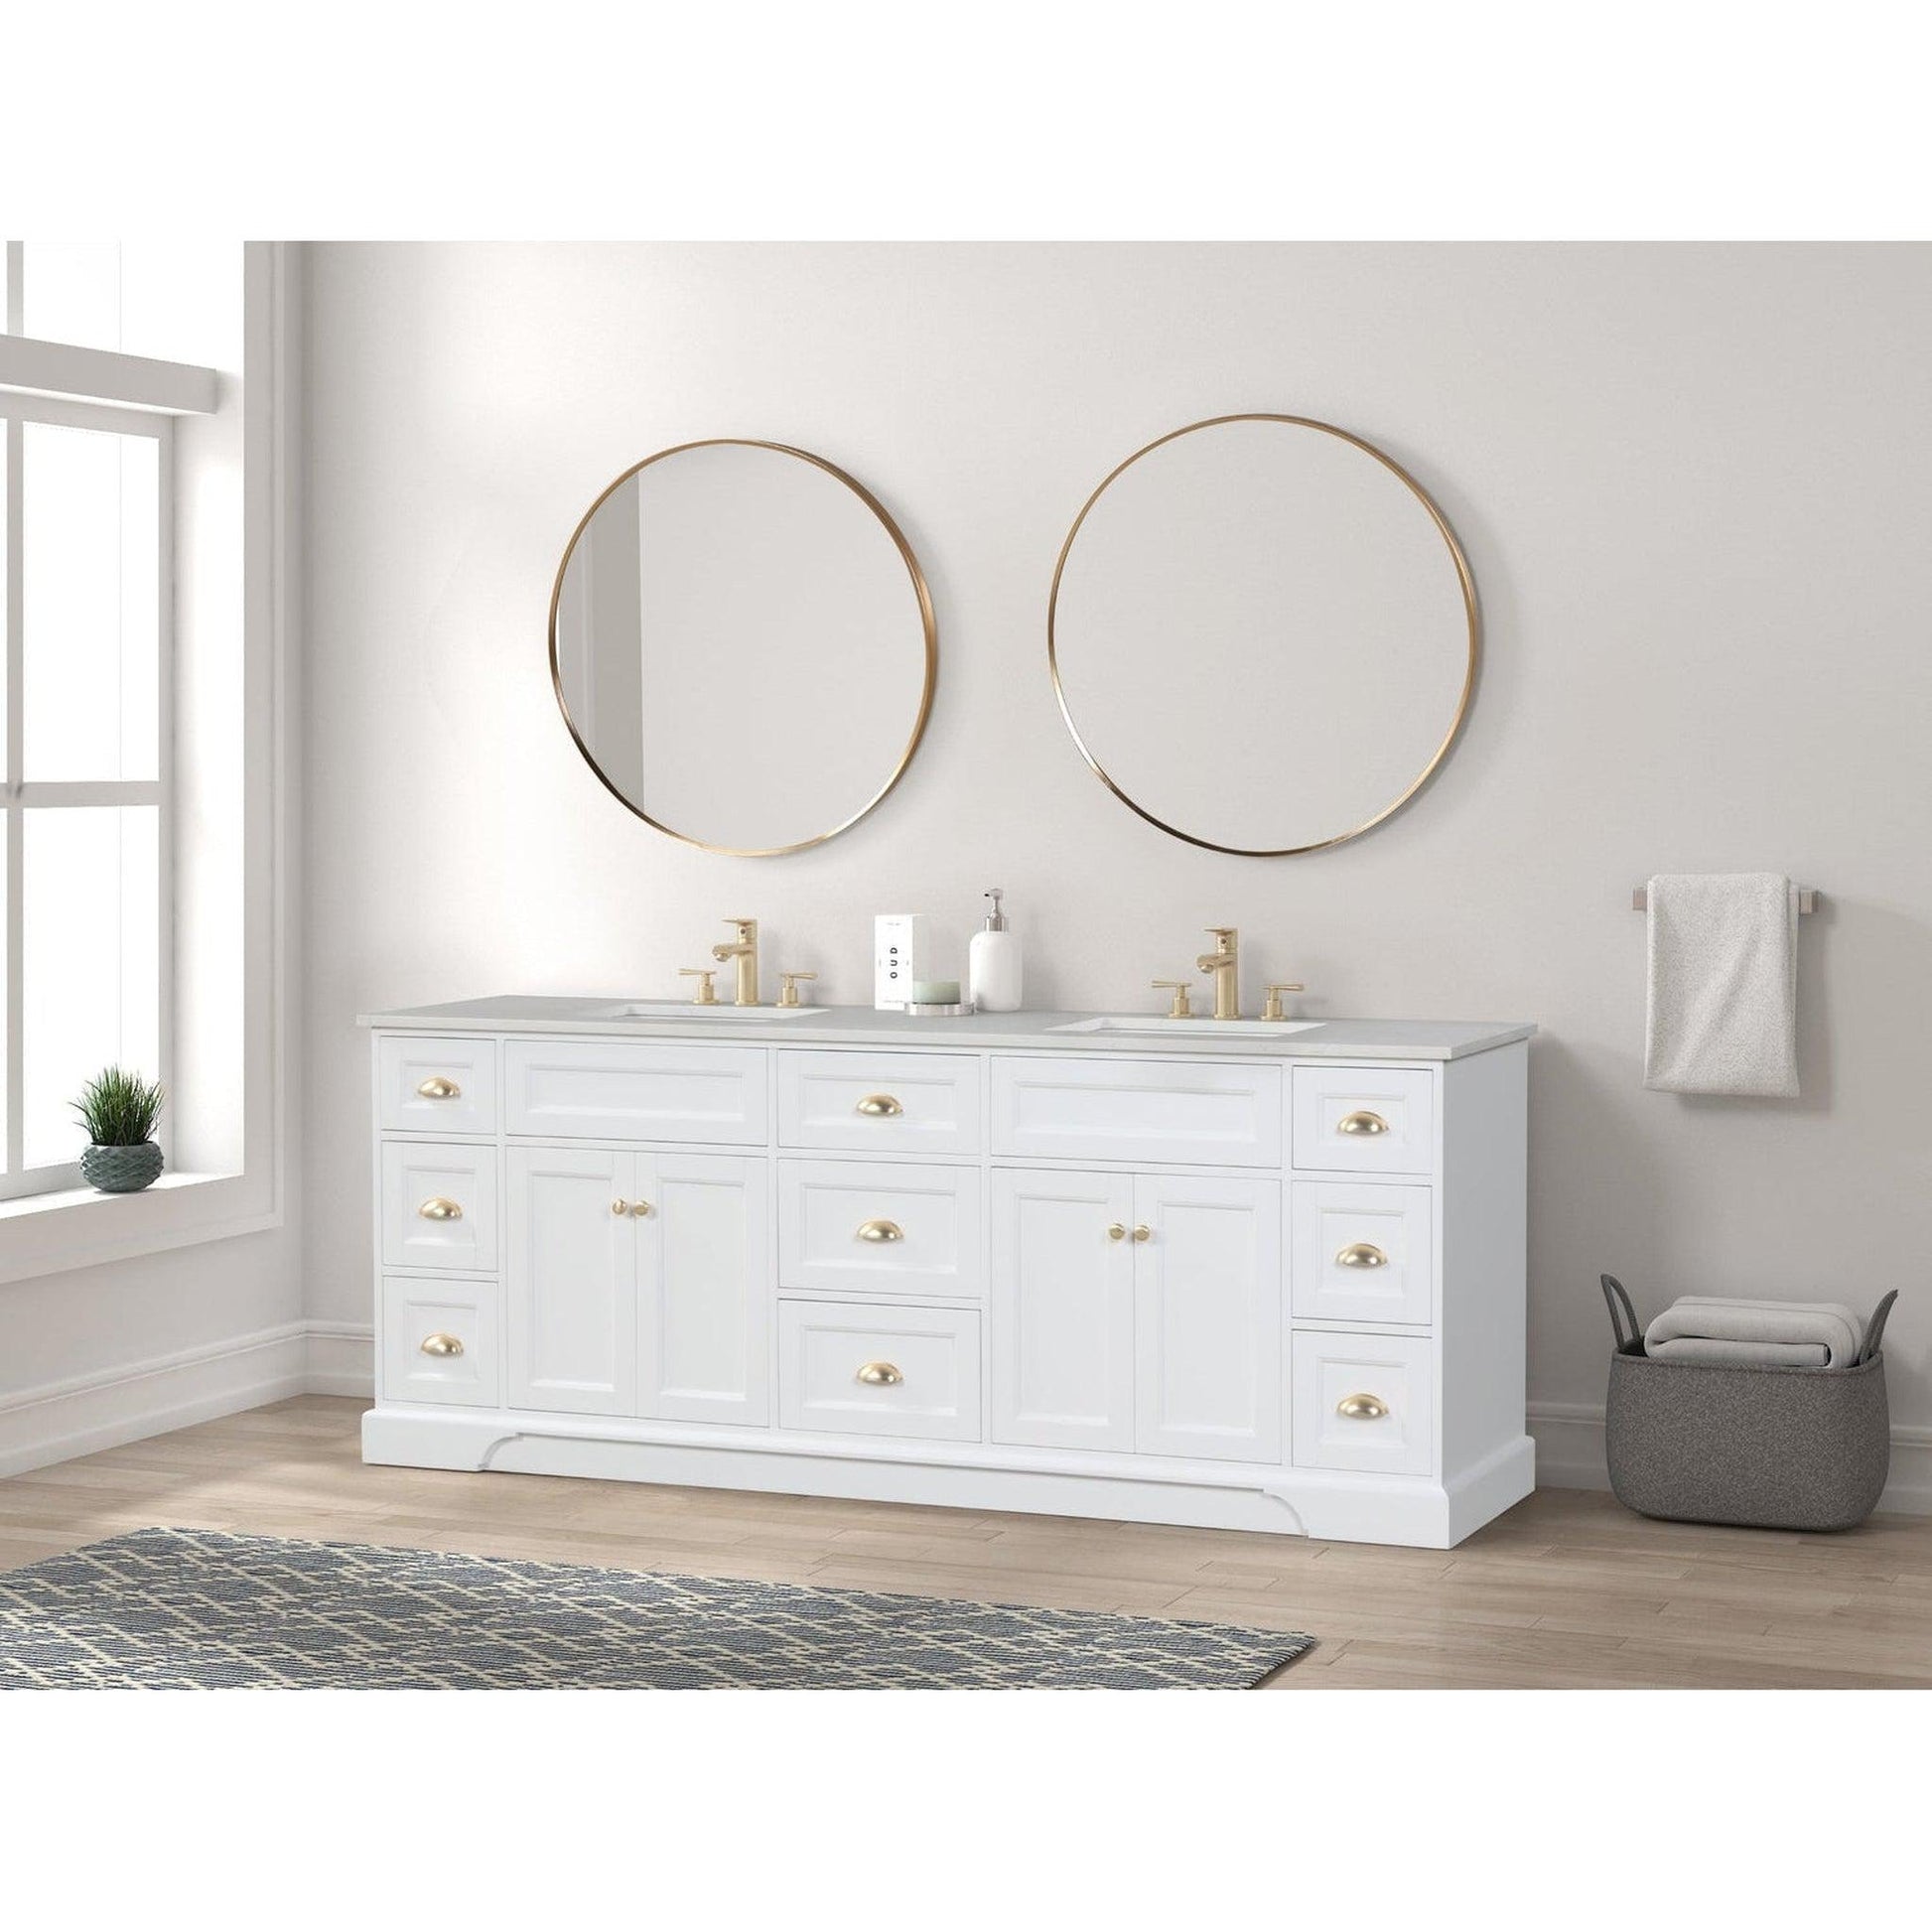 Eviva Epic 96" x 34" White Freestanding Bathroom Vanity With Brushed Gold Hardware and Quartz Countertop With Double Undermount Sink